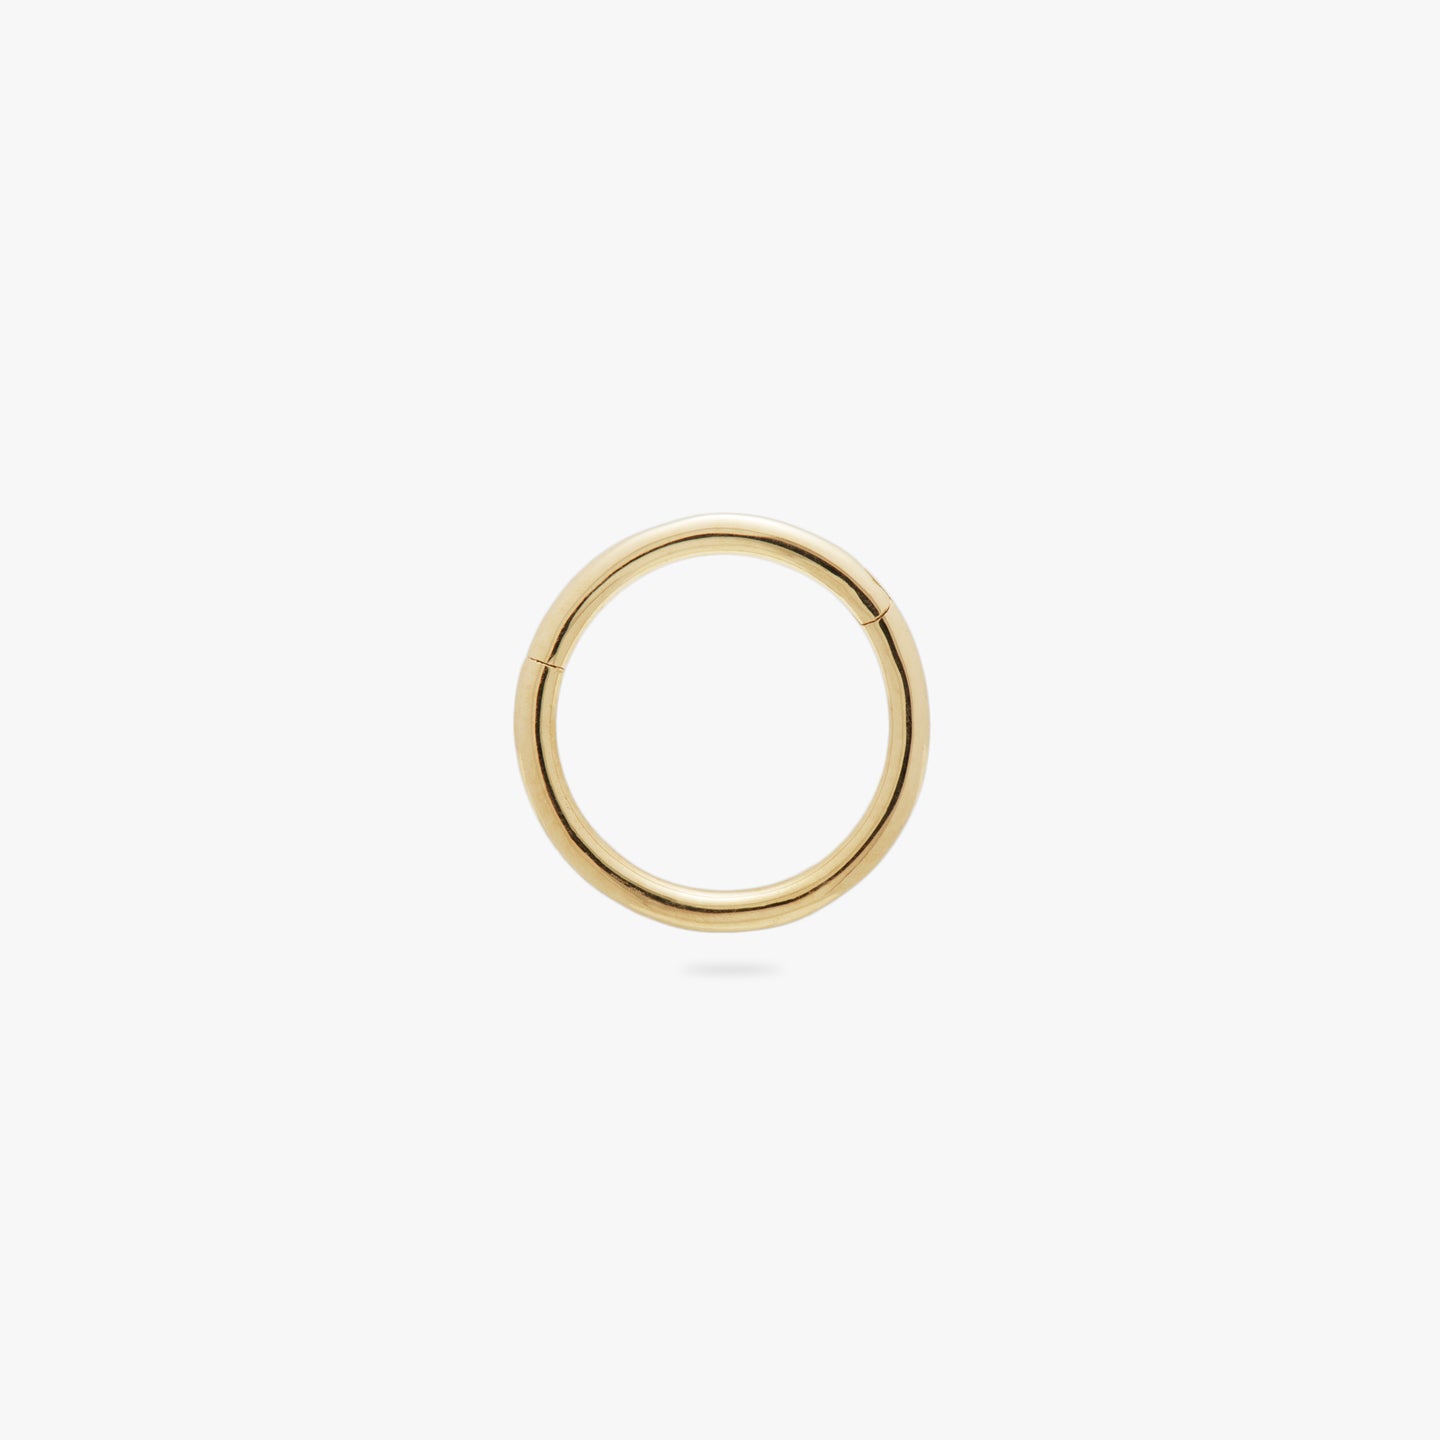 This is a gold clicker earring color:null|gold